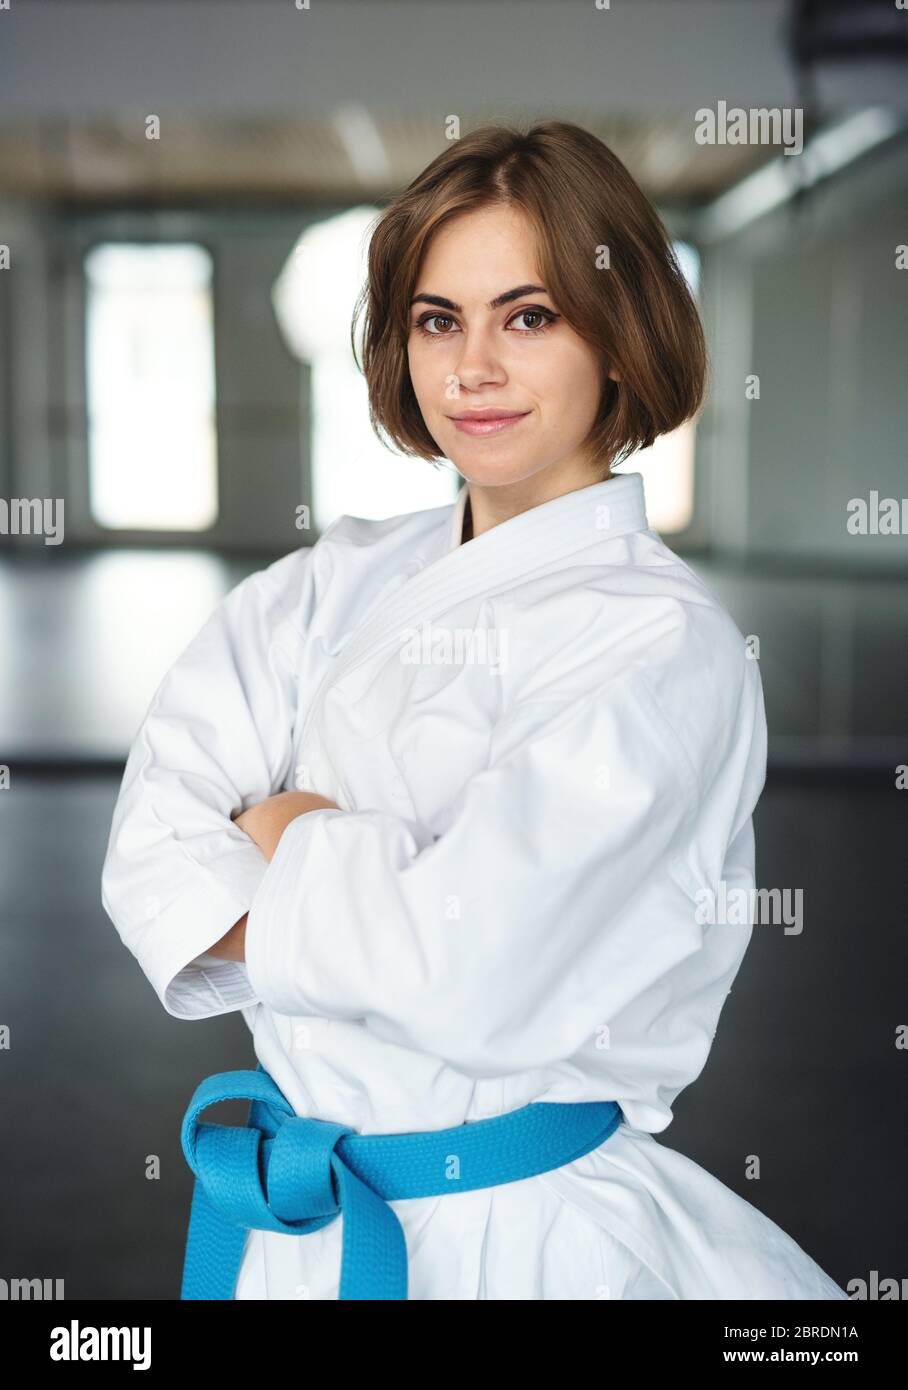 Young karate woman standing indoors in gym, looking at camera. Stock Photo